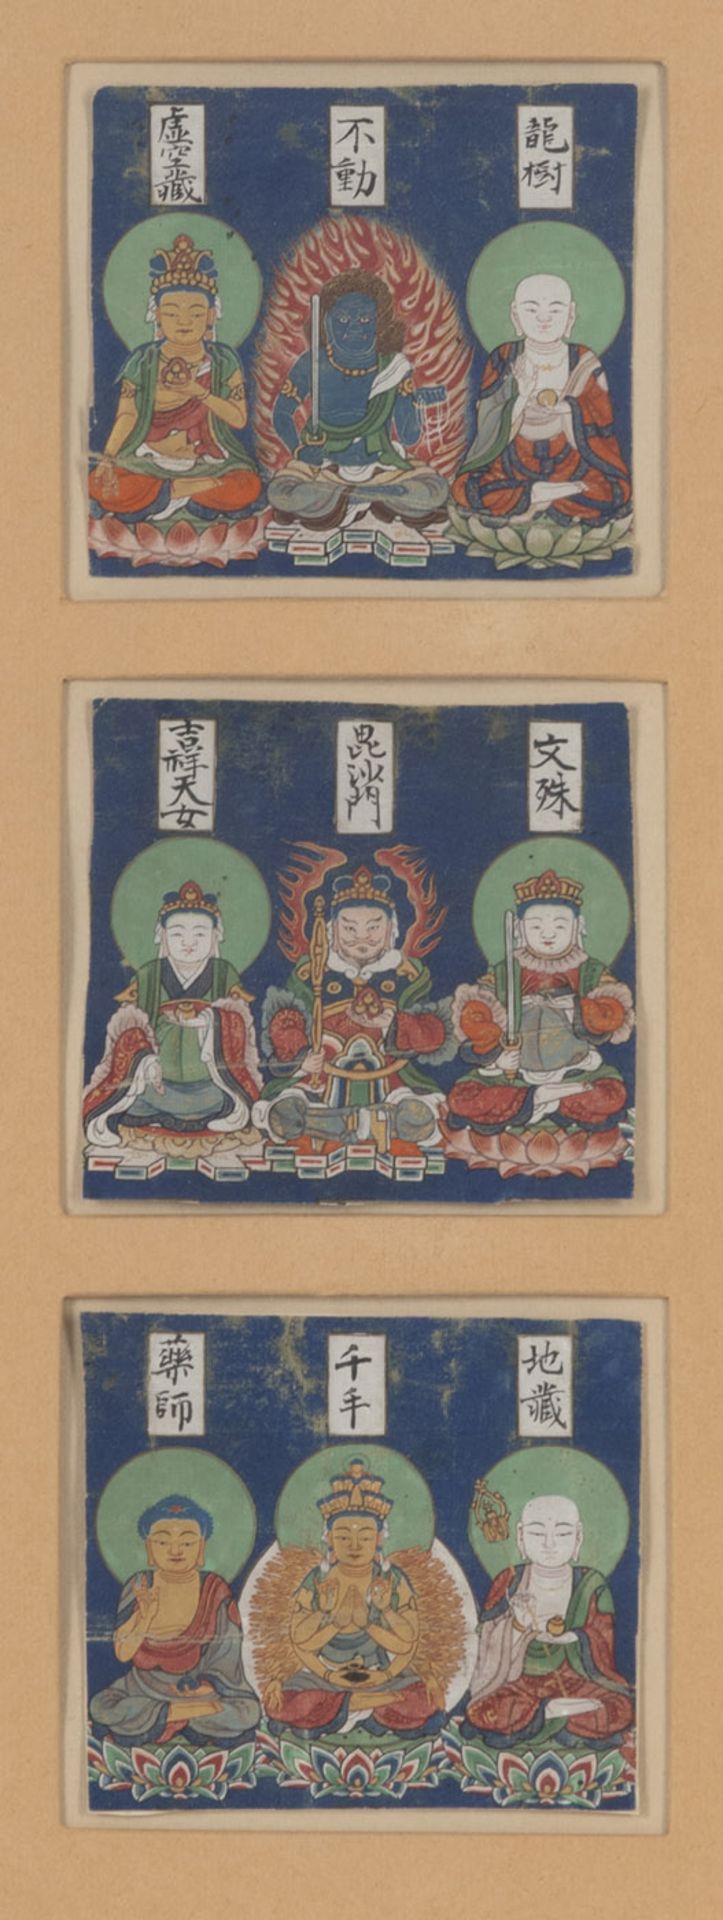 THREE FINE MANIATURE PAINTINGS, EACH DEPICTING A GROUP OF THREE BUDDHIST DEITIES AND NAMES